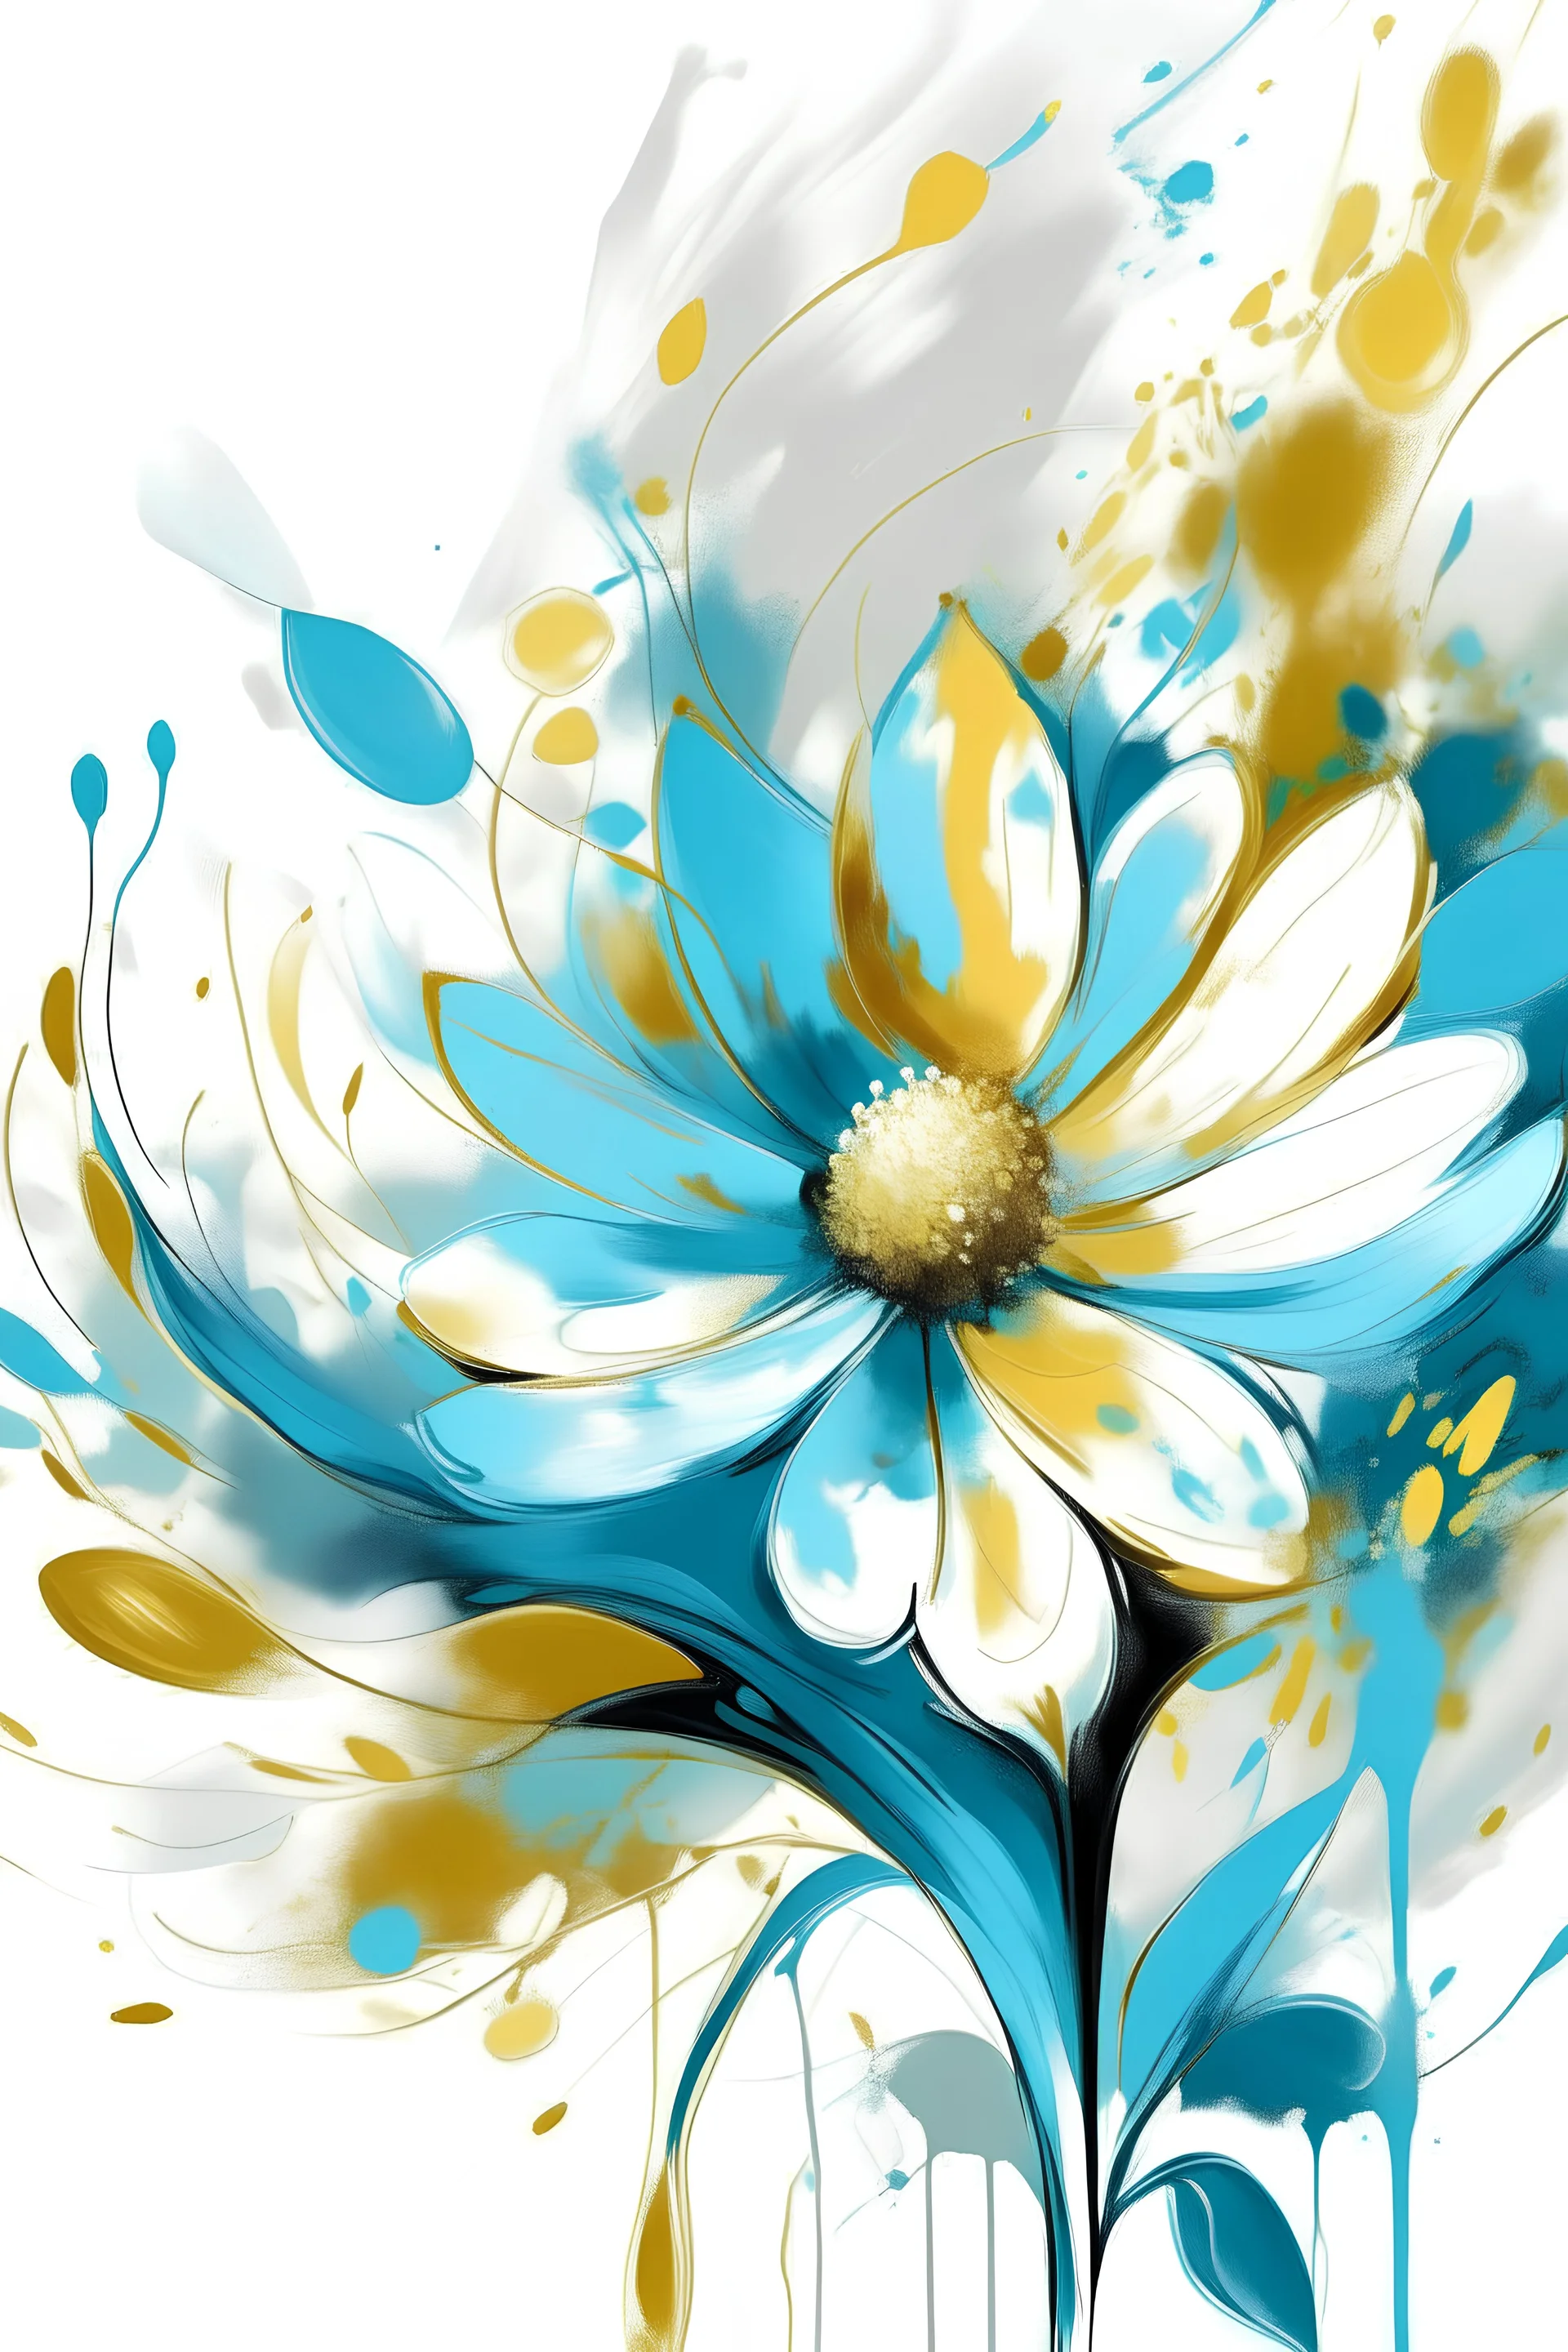 bright light and turquoise , gold and BLUES flower van Gough white background